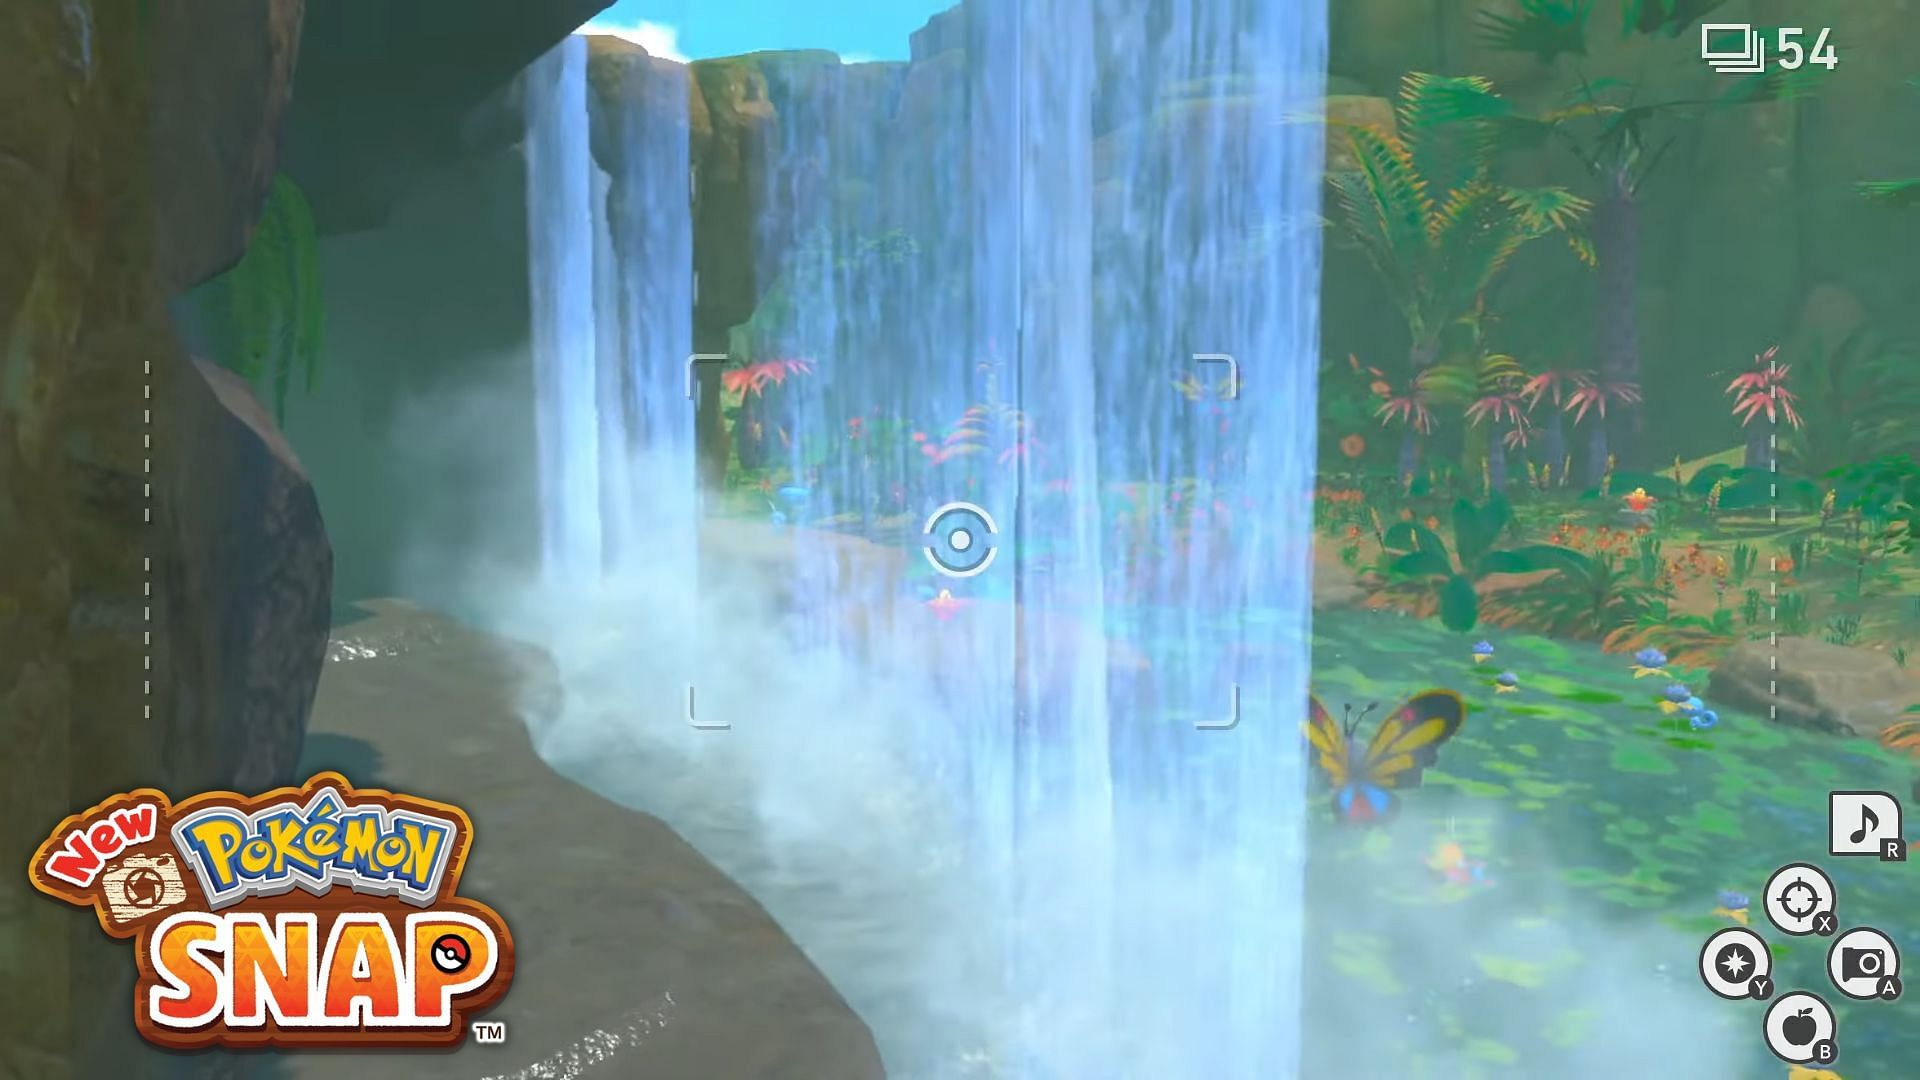 How to get behind the Waterfall in New Pokemon Snap?